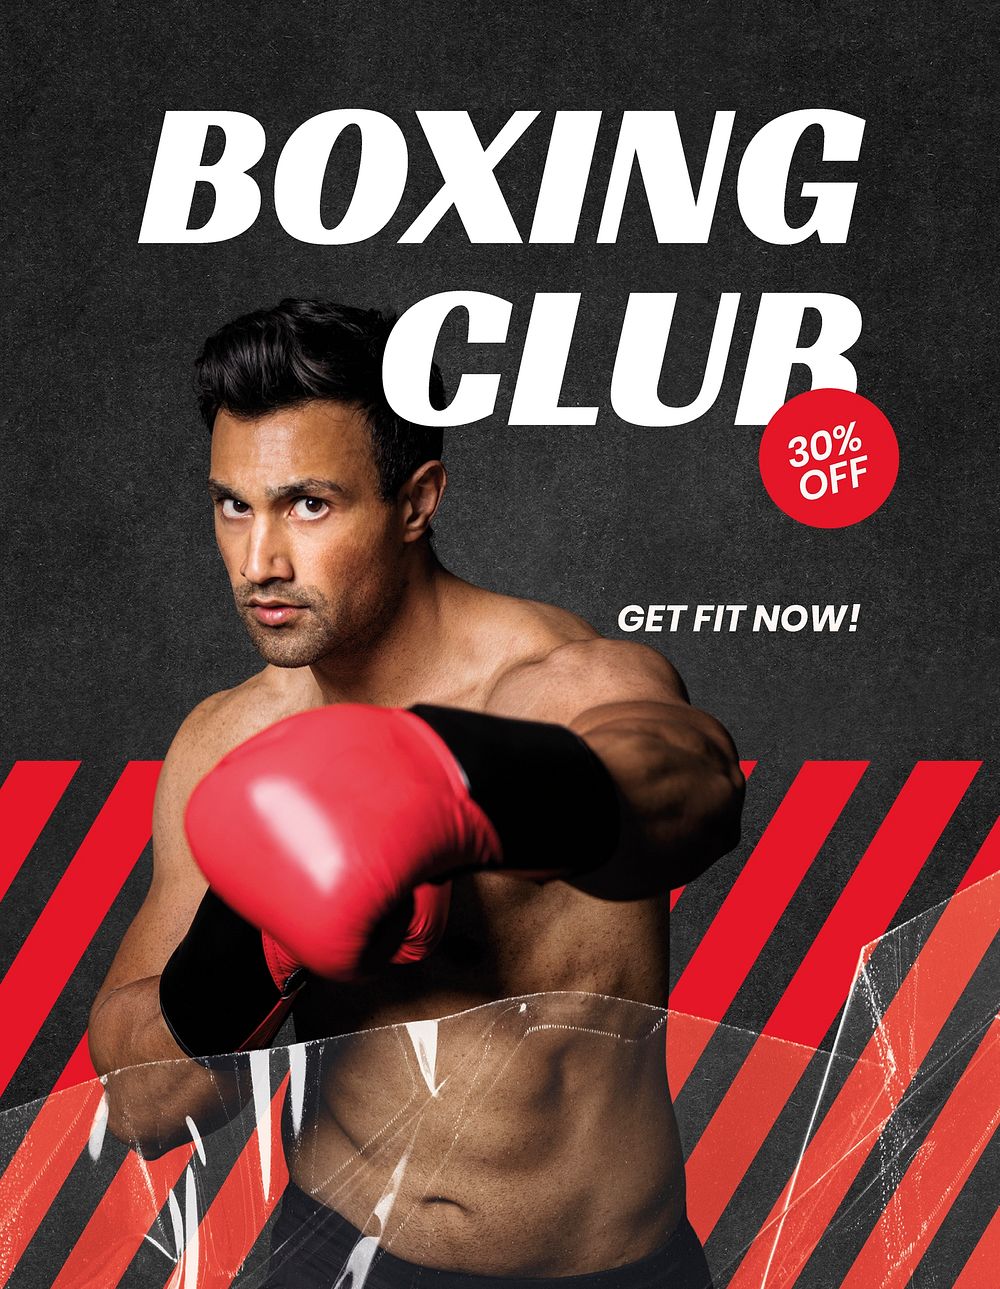 Boxing club flyer template, sports, gym advertisement psd